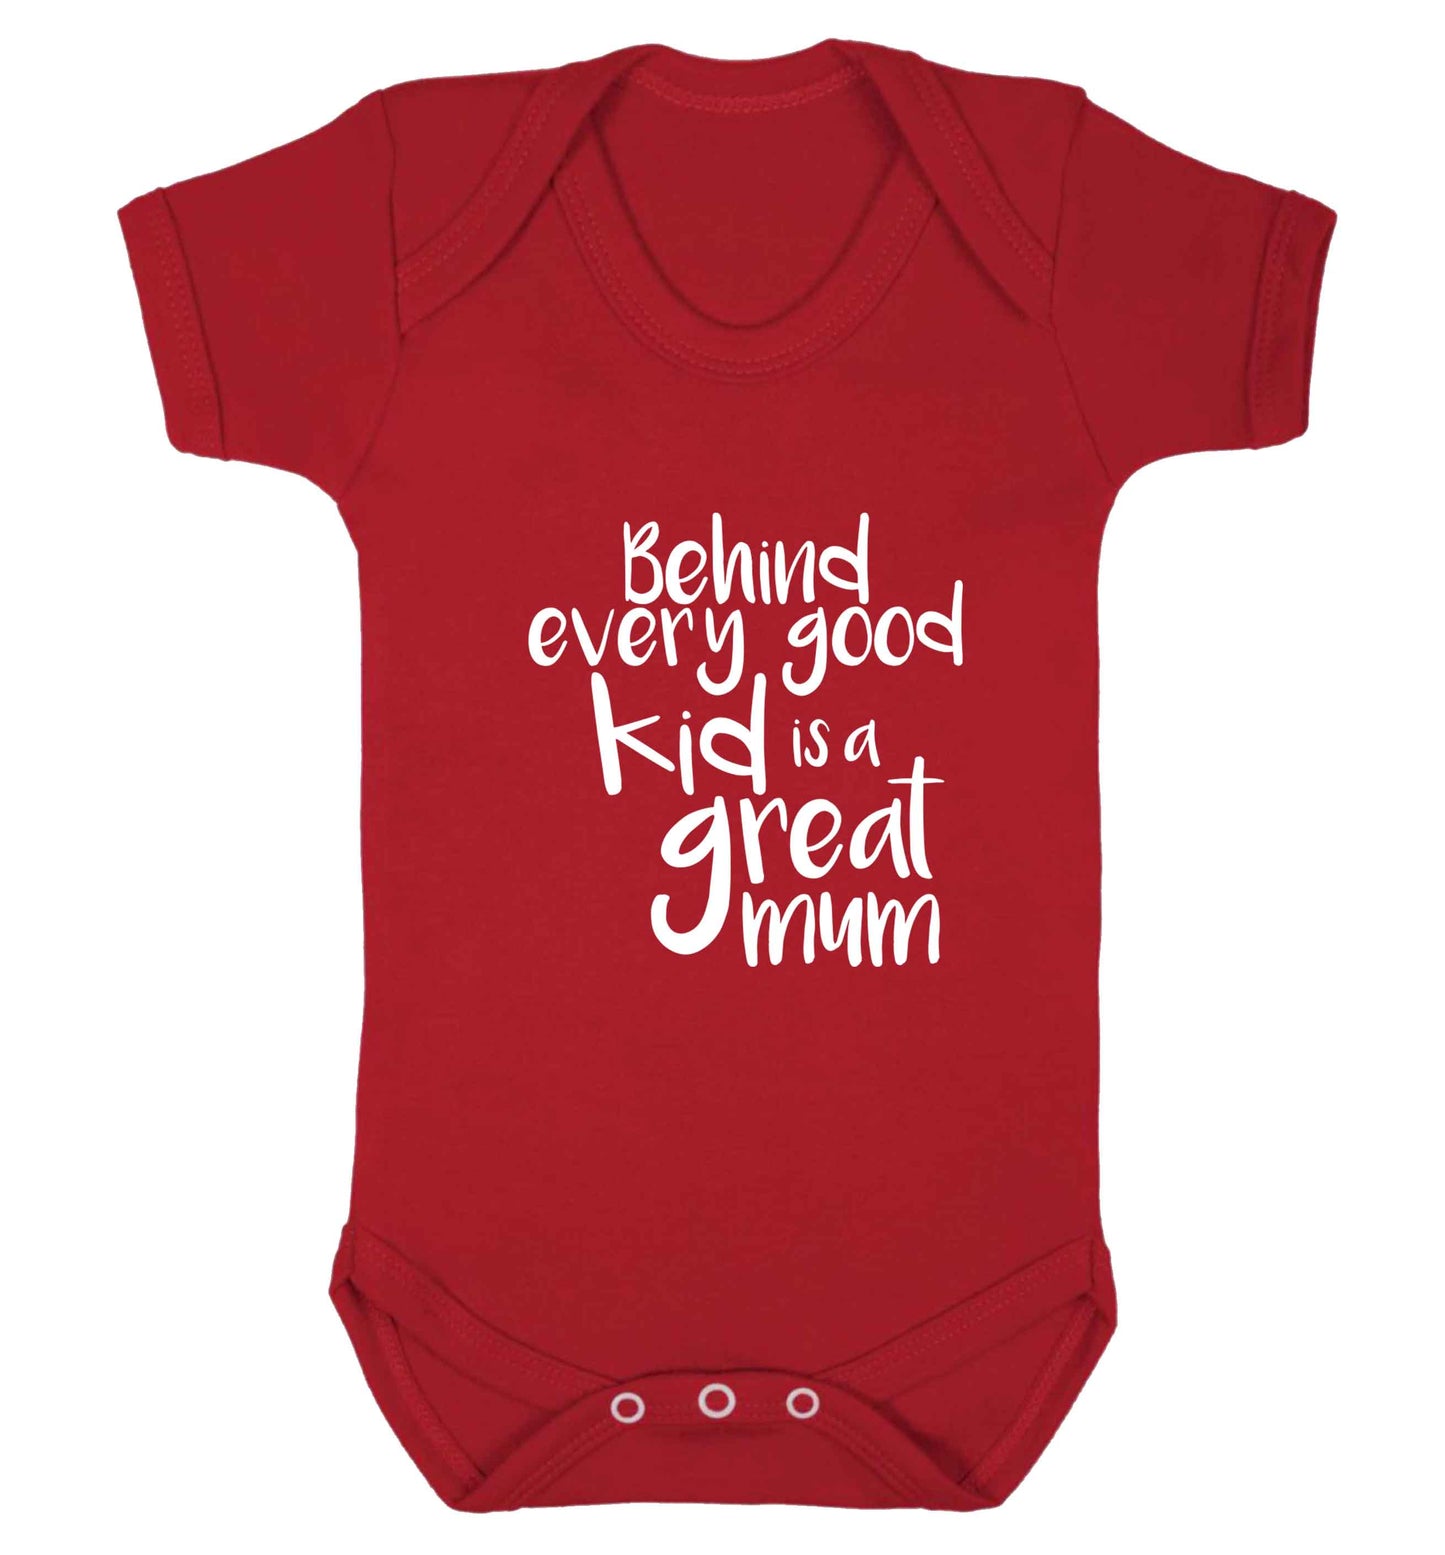 Behind every good kid is a great mum baby vest red 18-24 months